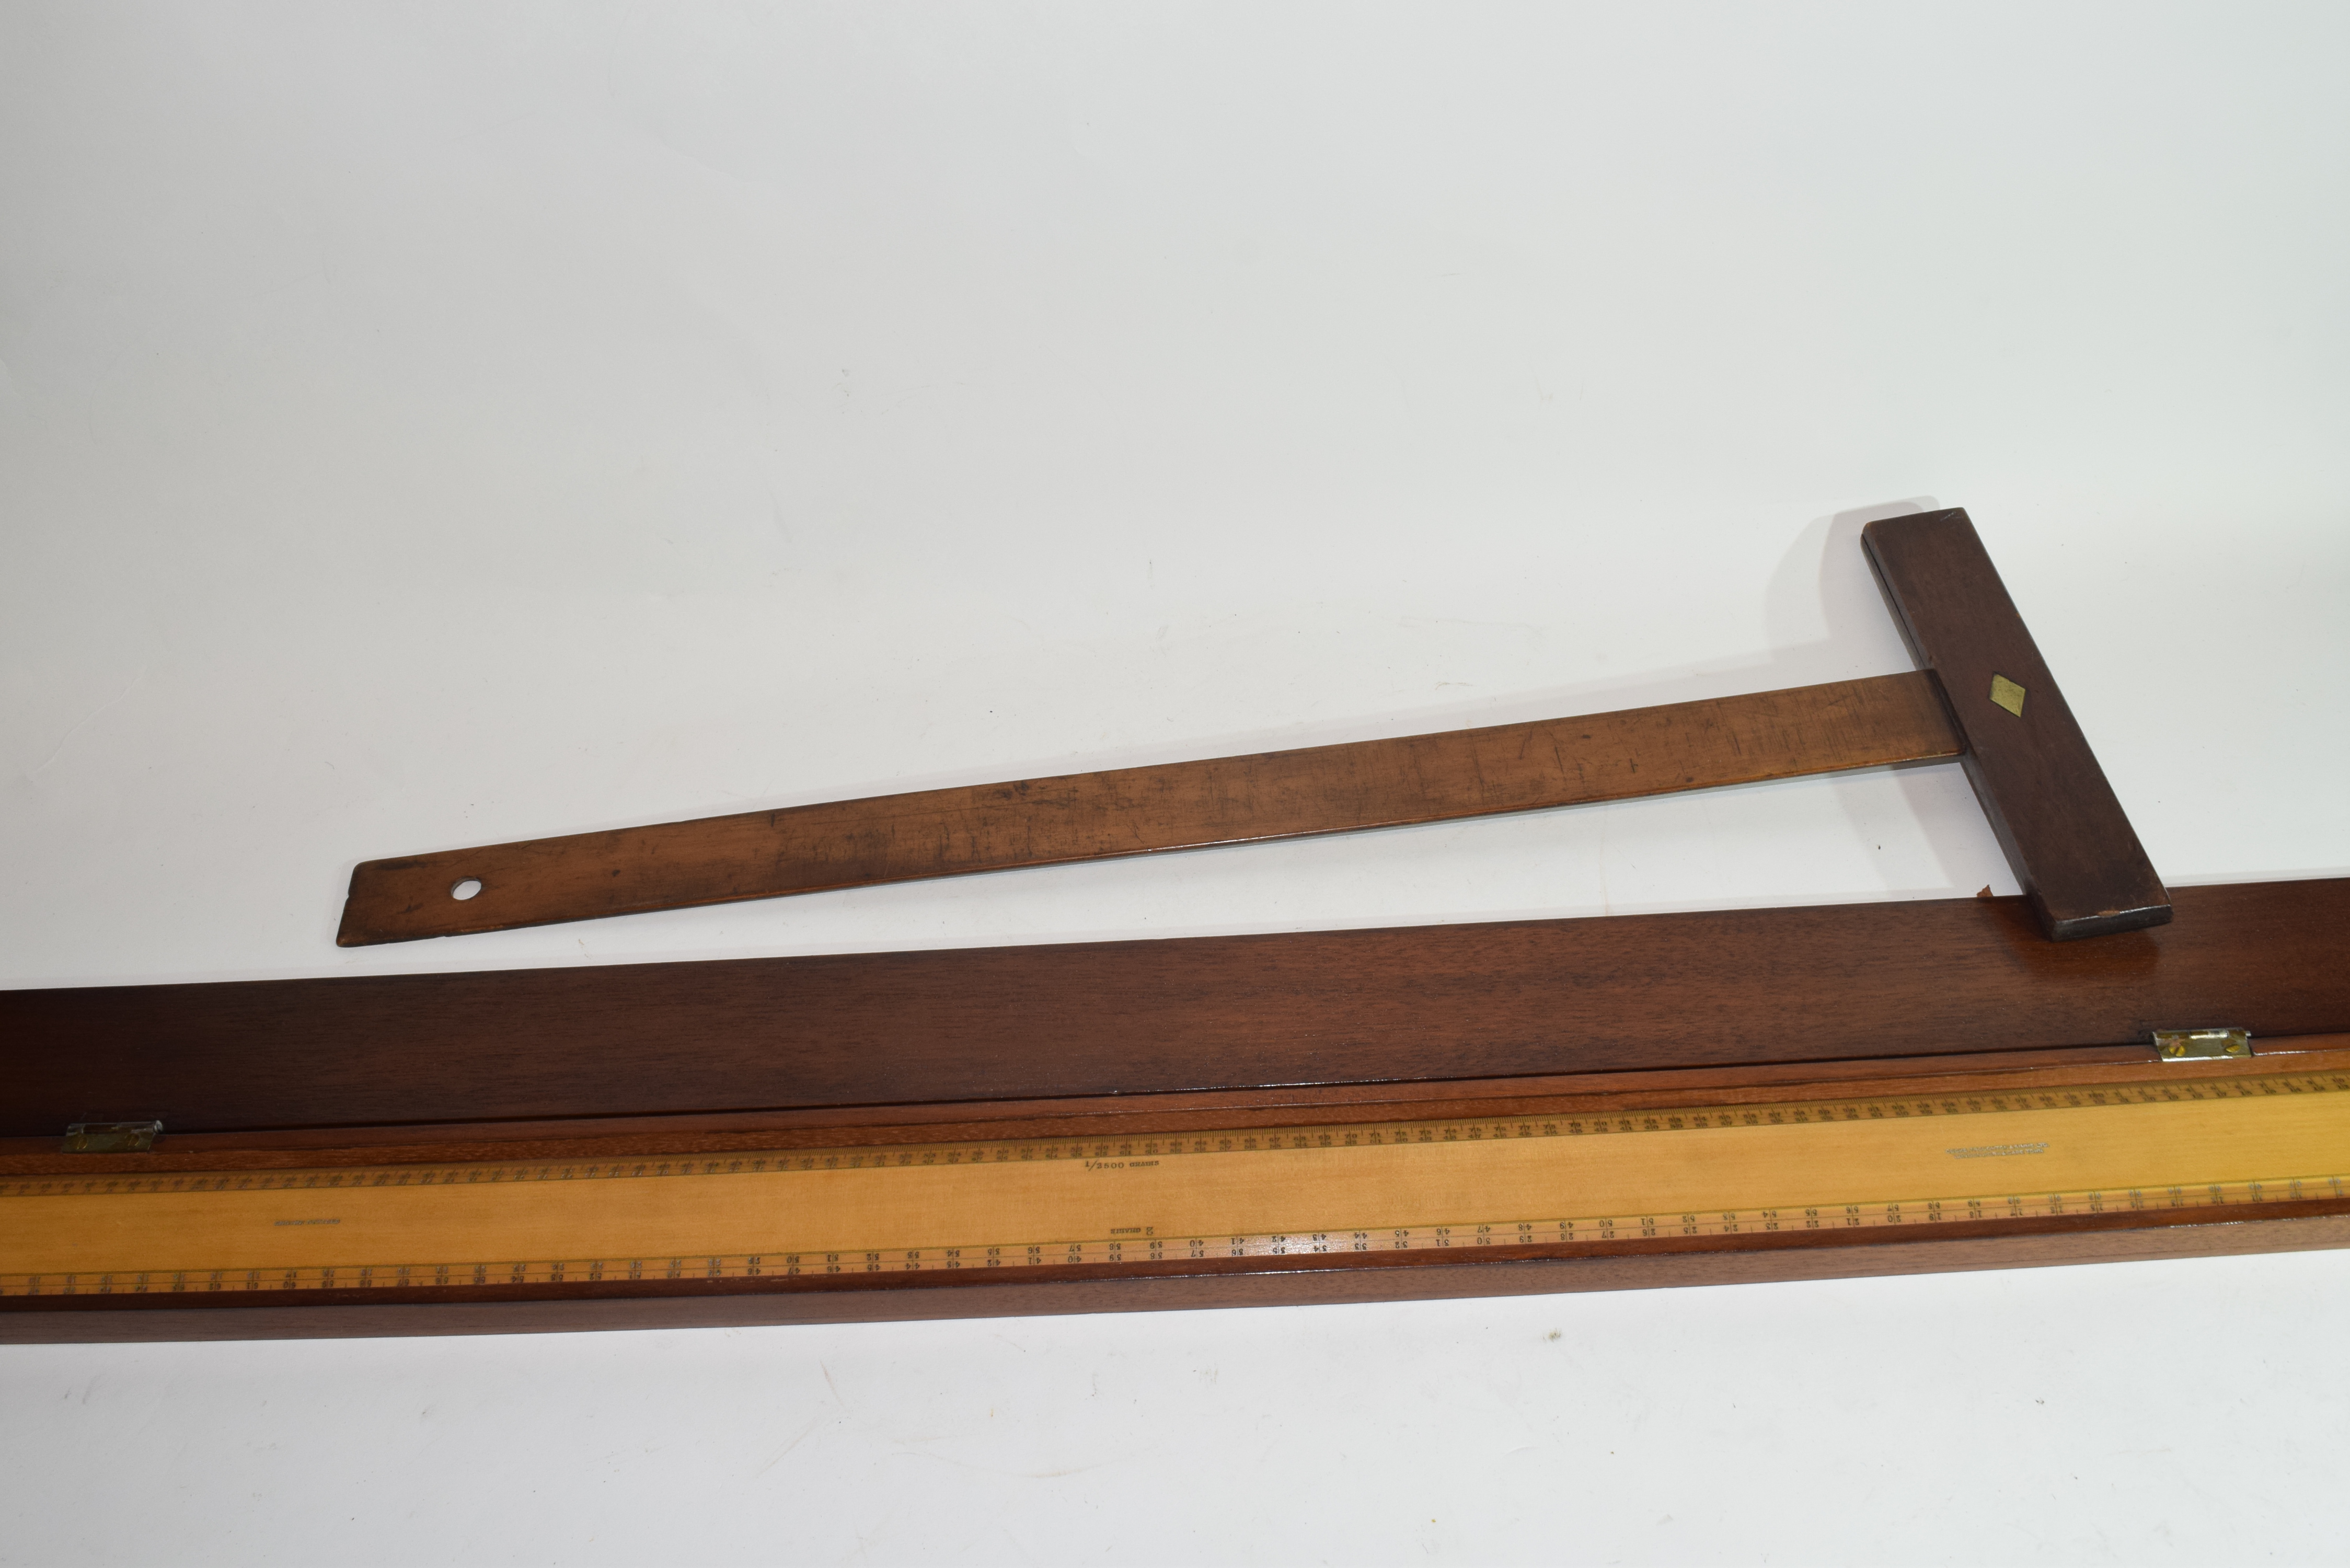 Large draughtsman's ruler by Cooke Troughton & Simms Ltd, London, the ruler with divisions in